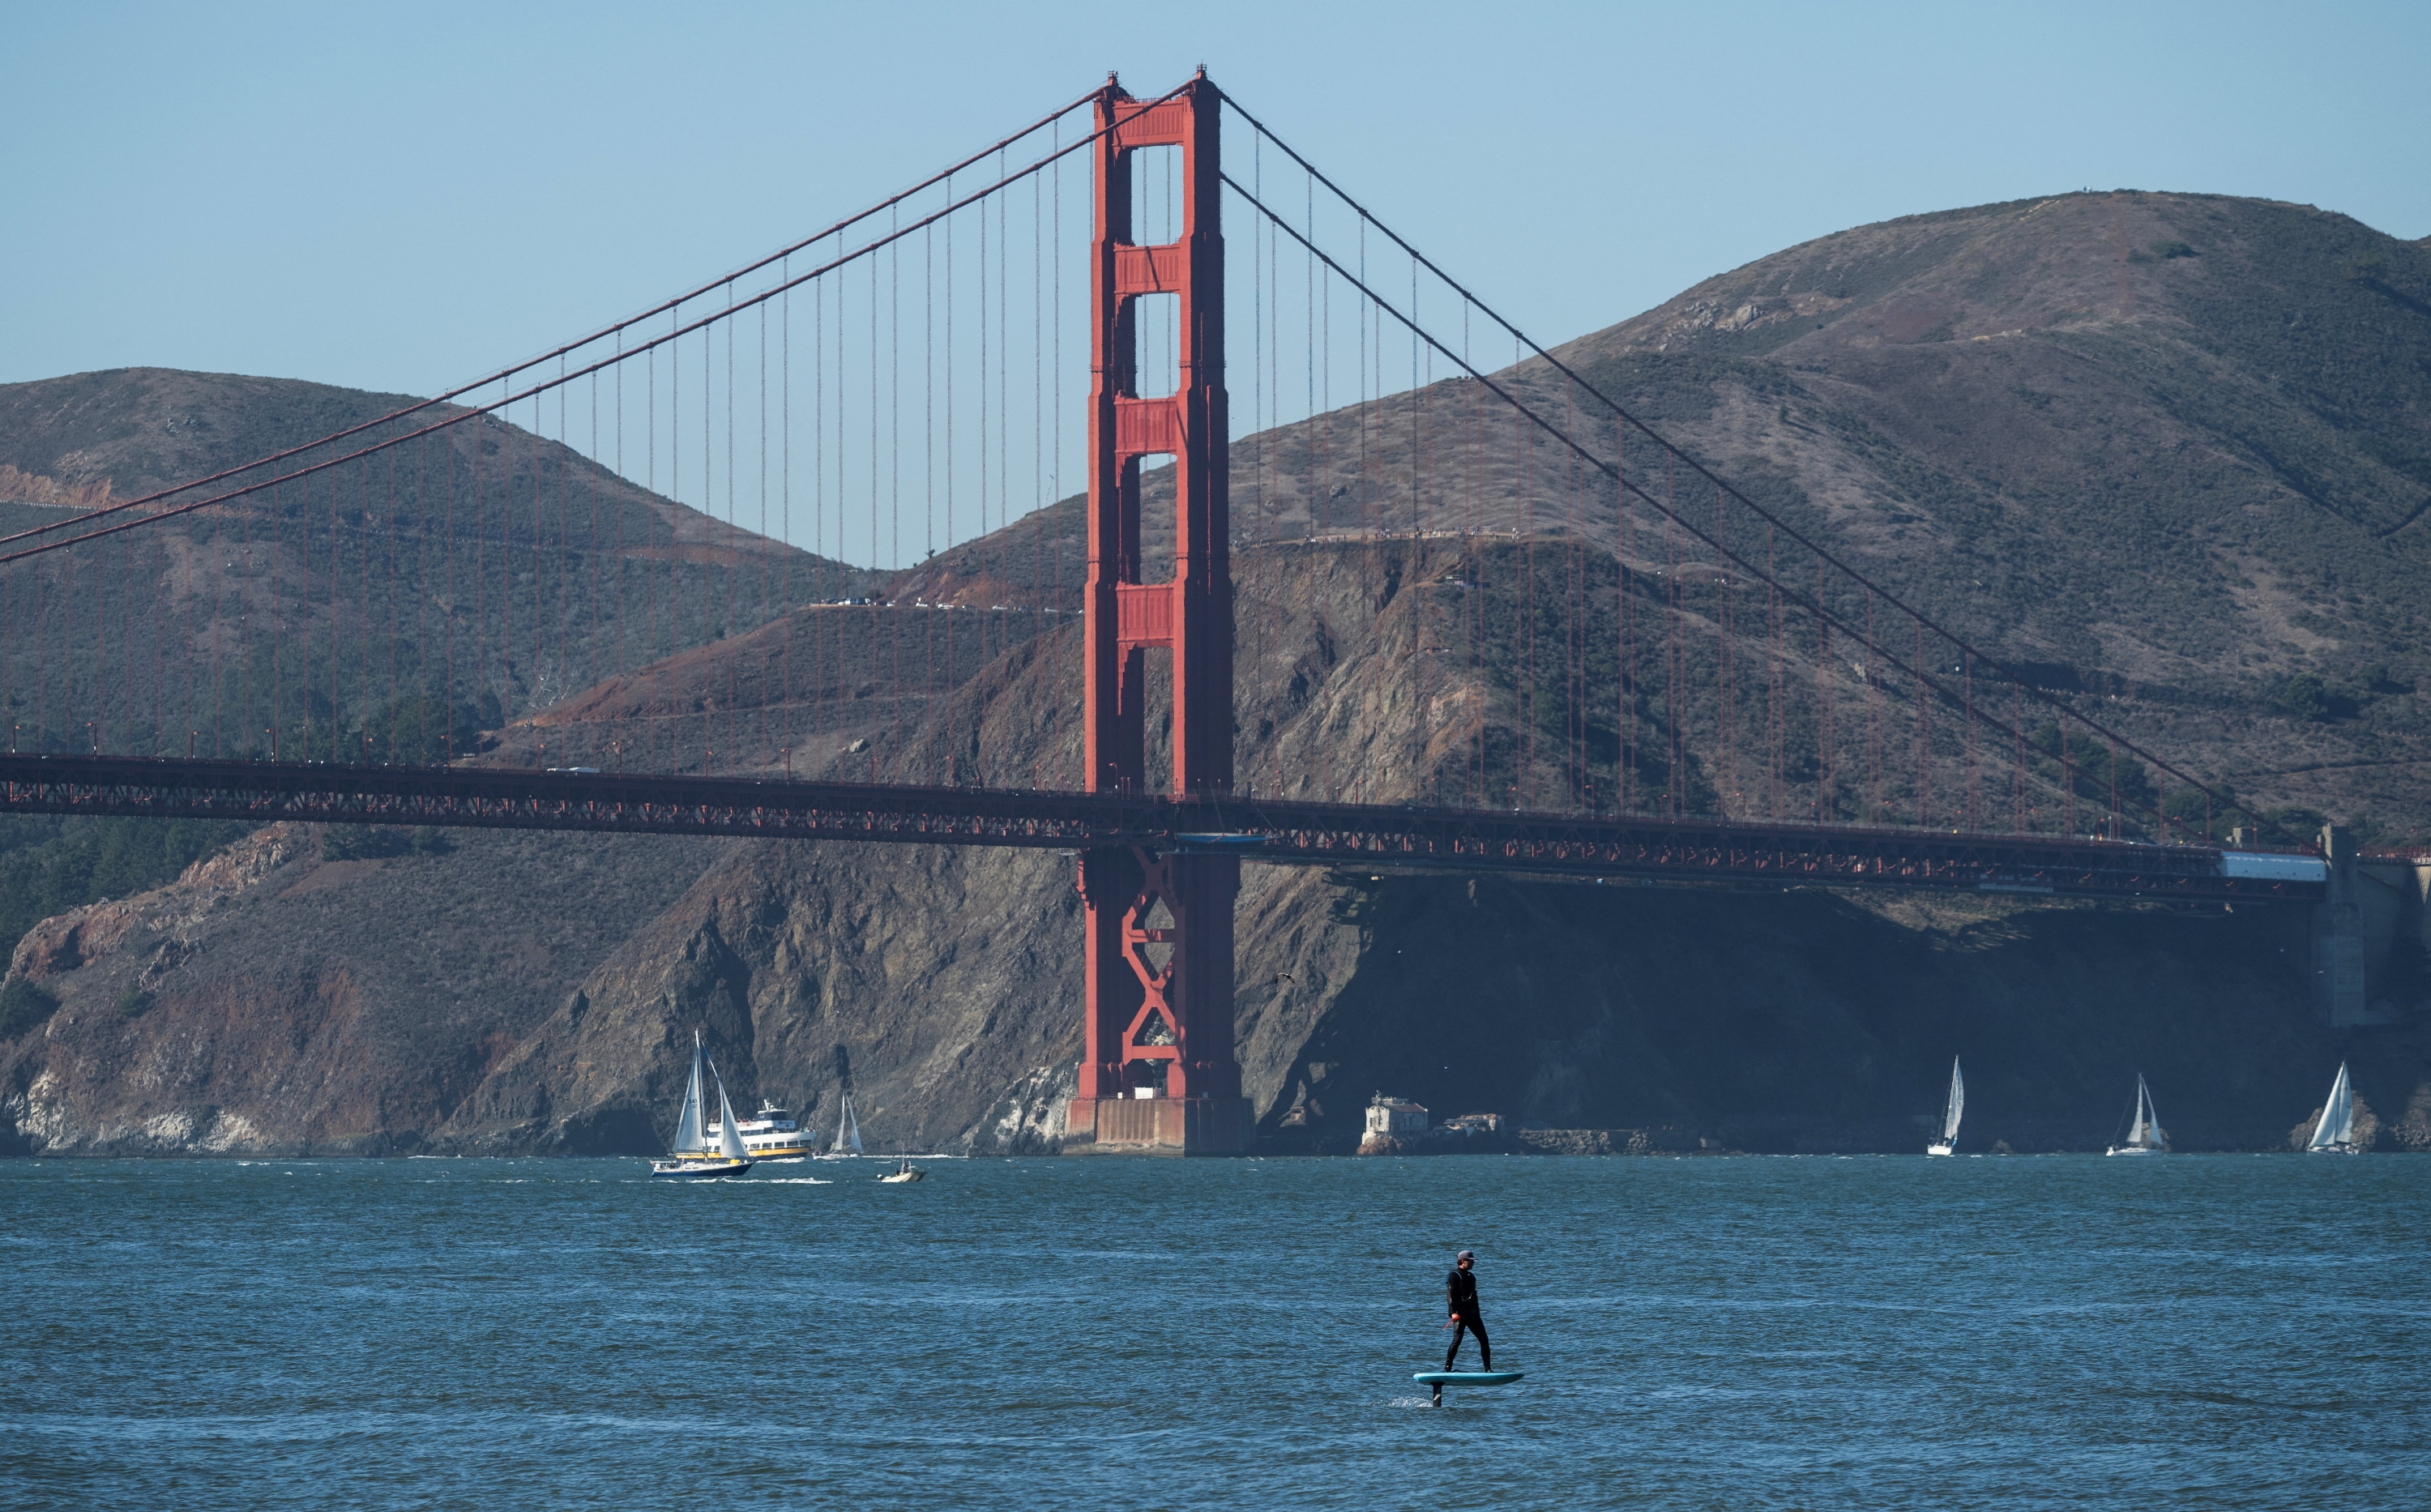 A man foil boards near the Golden Gate Bridge in San Francisco, California, on November 11, 2023. (Photo by ANDREW CABALLERO-REYNOLDS / AFP)